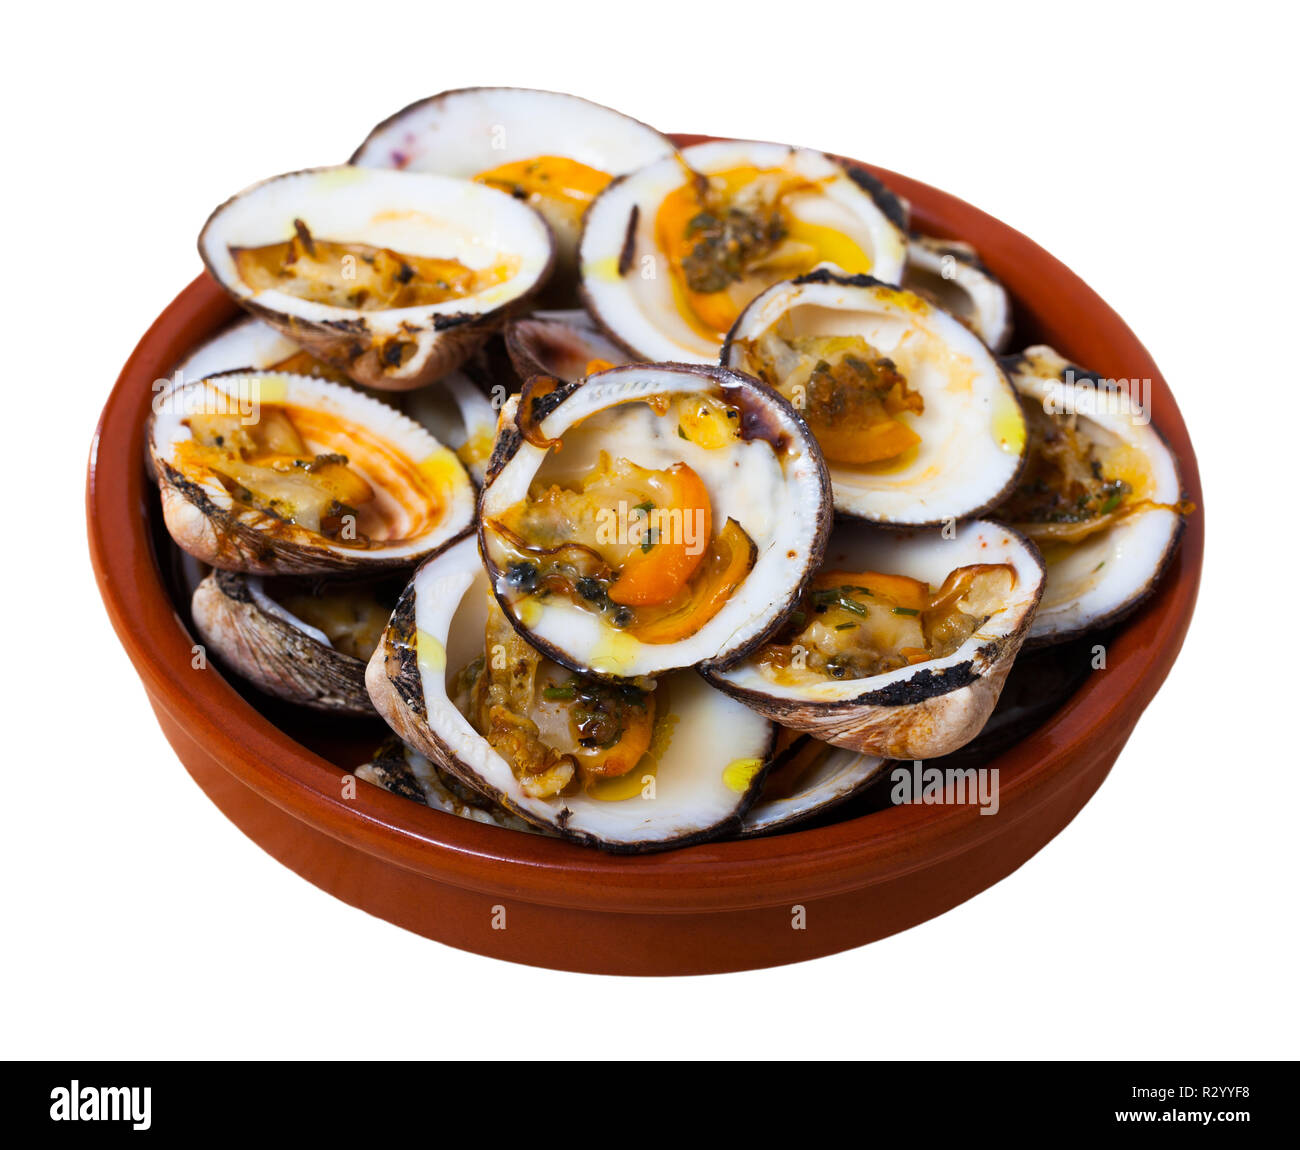 Image of tasty open dog cockle baked in oven. Isolated over white background Stock Photo